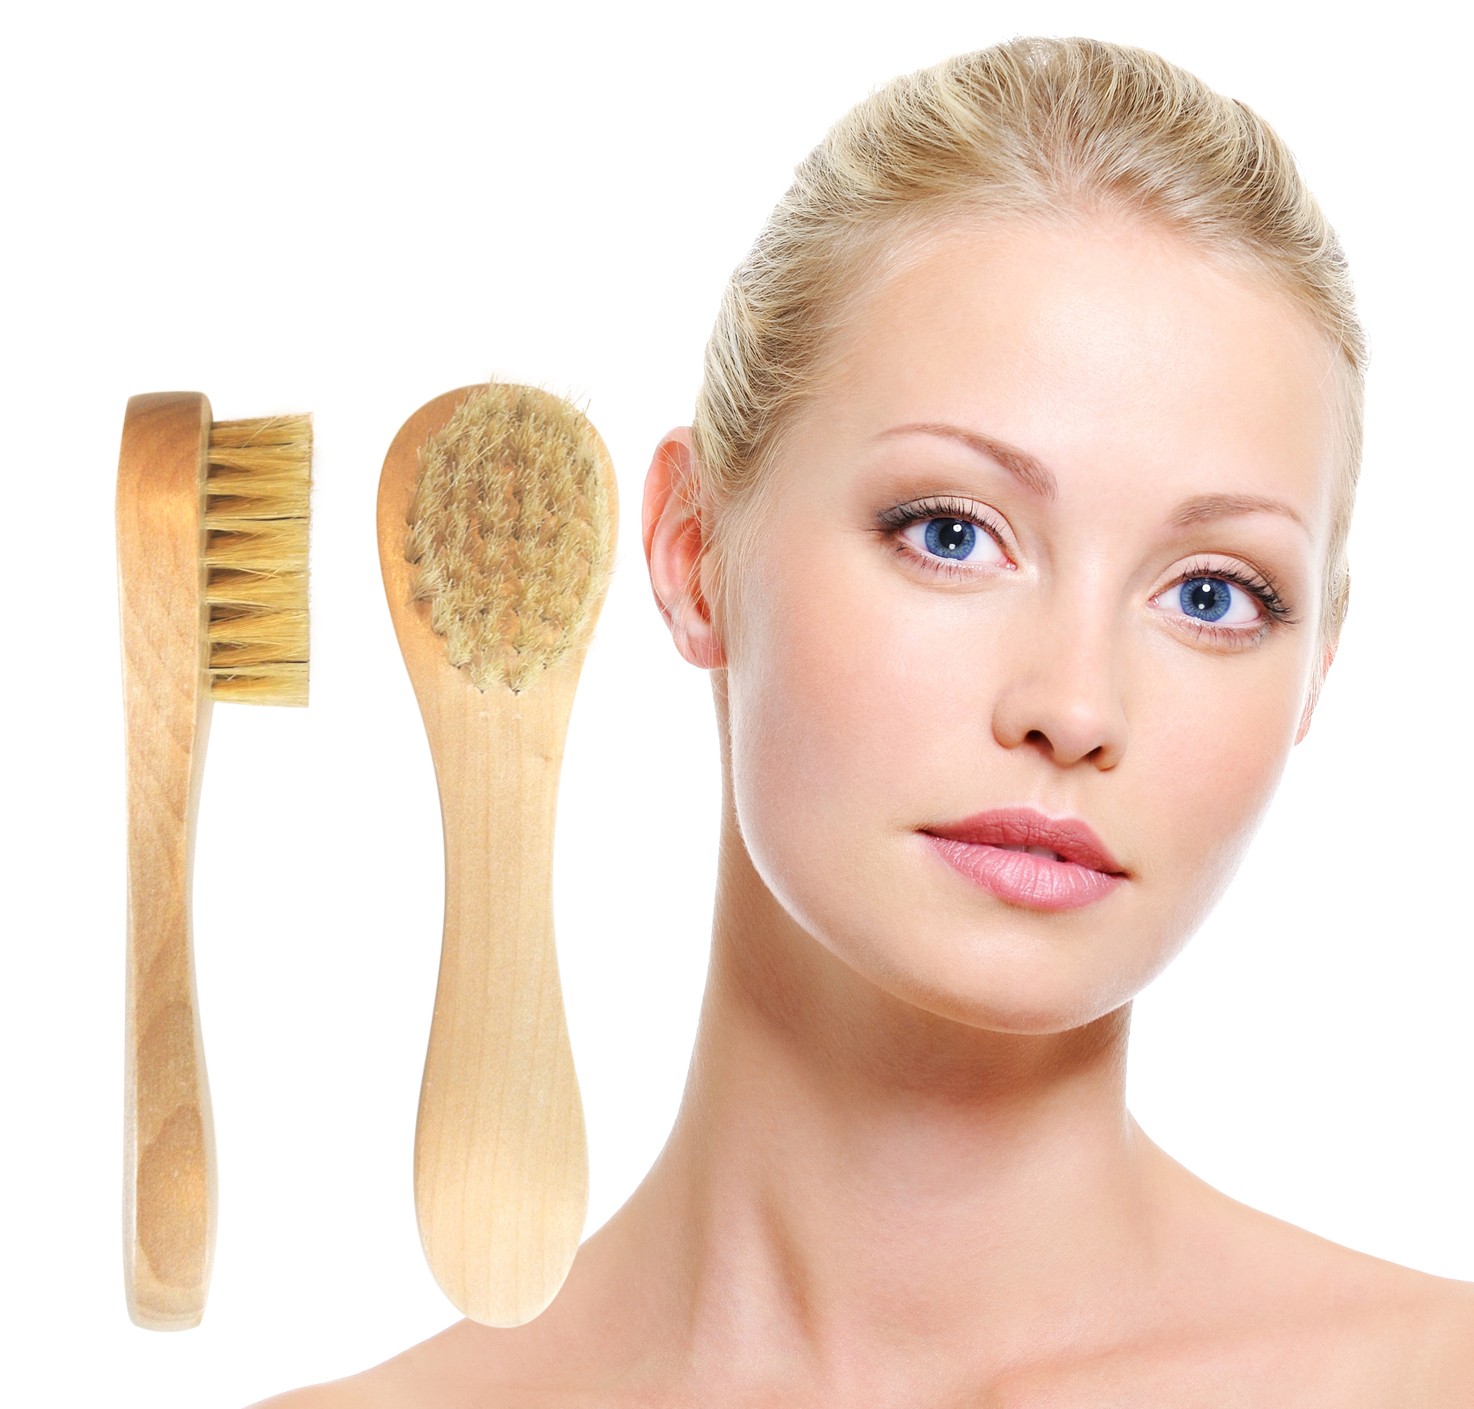 Gorgeous Skin 3 Top Benefits Of Dry Face Brushing From Sublime Beauty® 